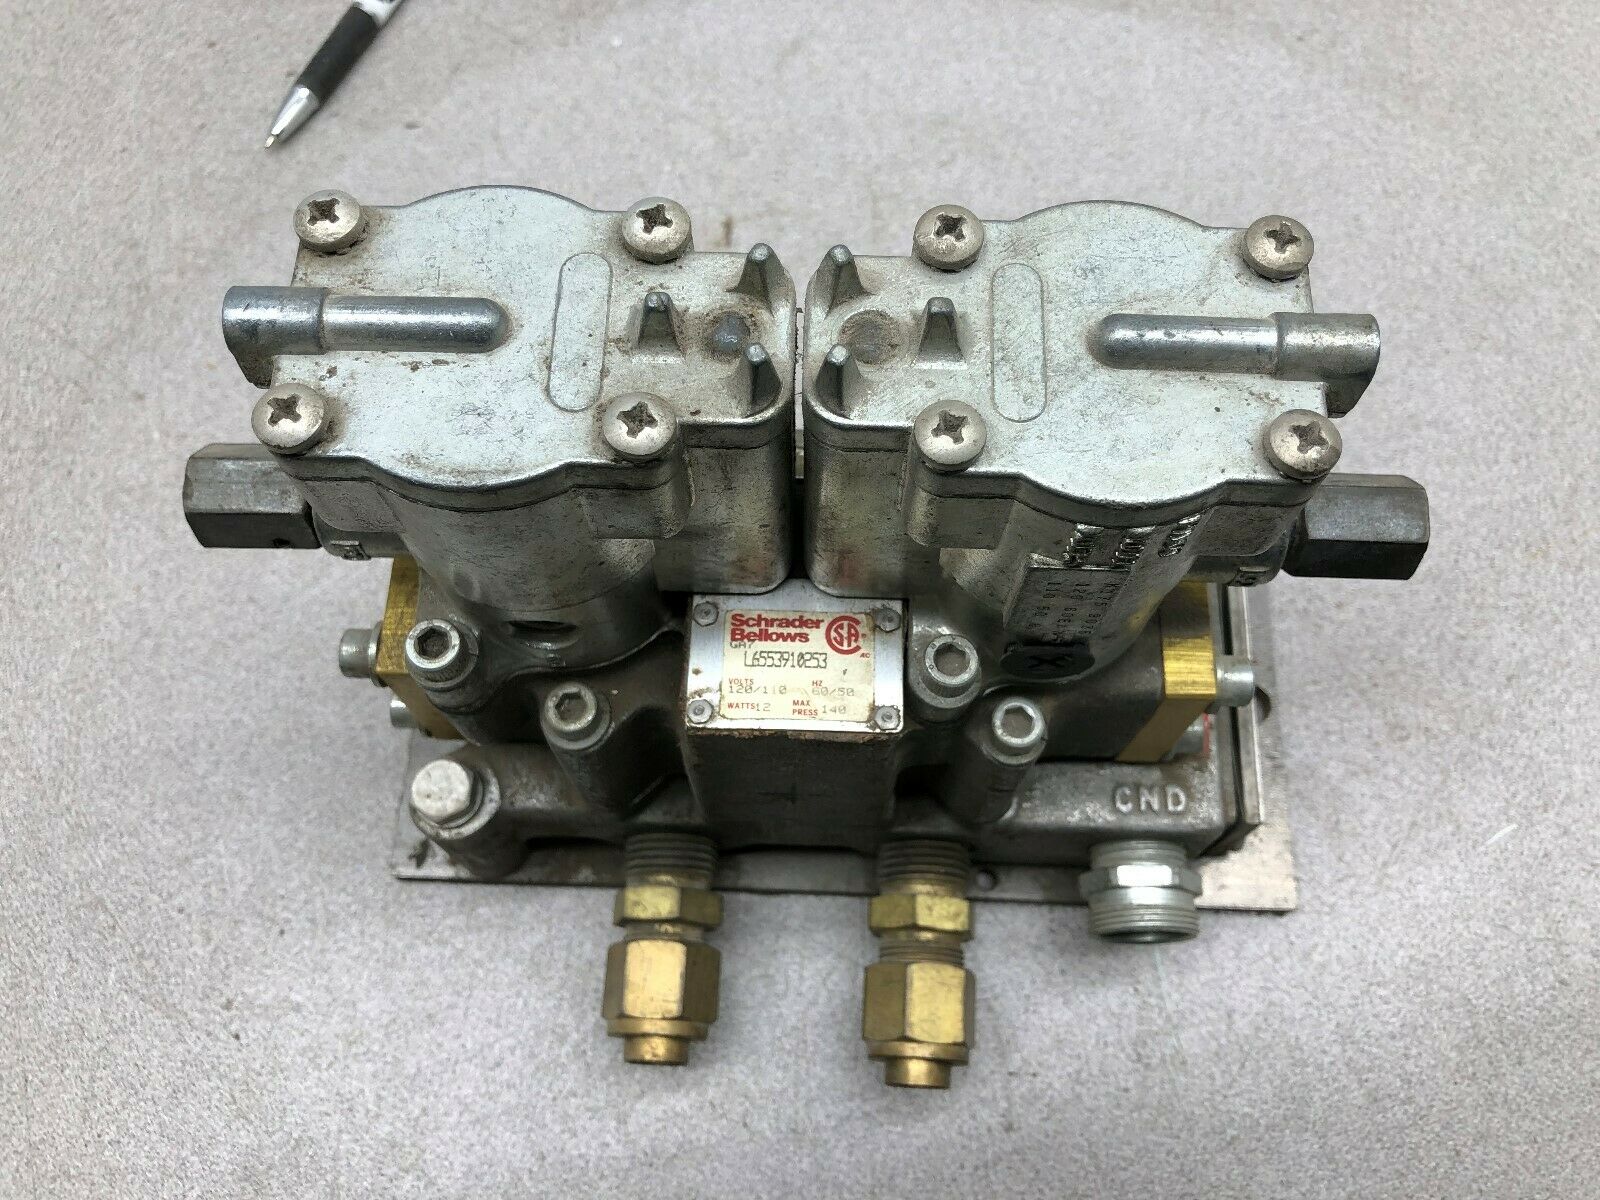 USED SCHRADER BELLOWS 120 VAC 140 PSI PNEUMATIC SOLENOID VALVE WITH BASE L655391